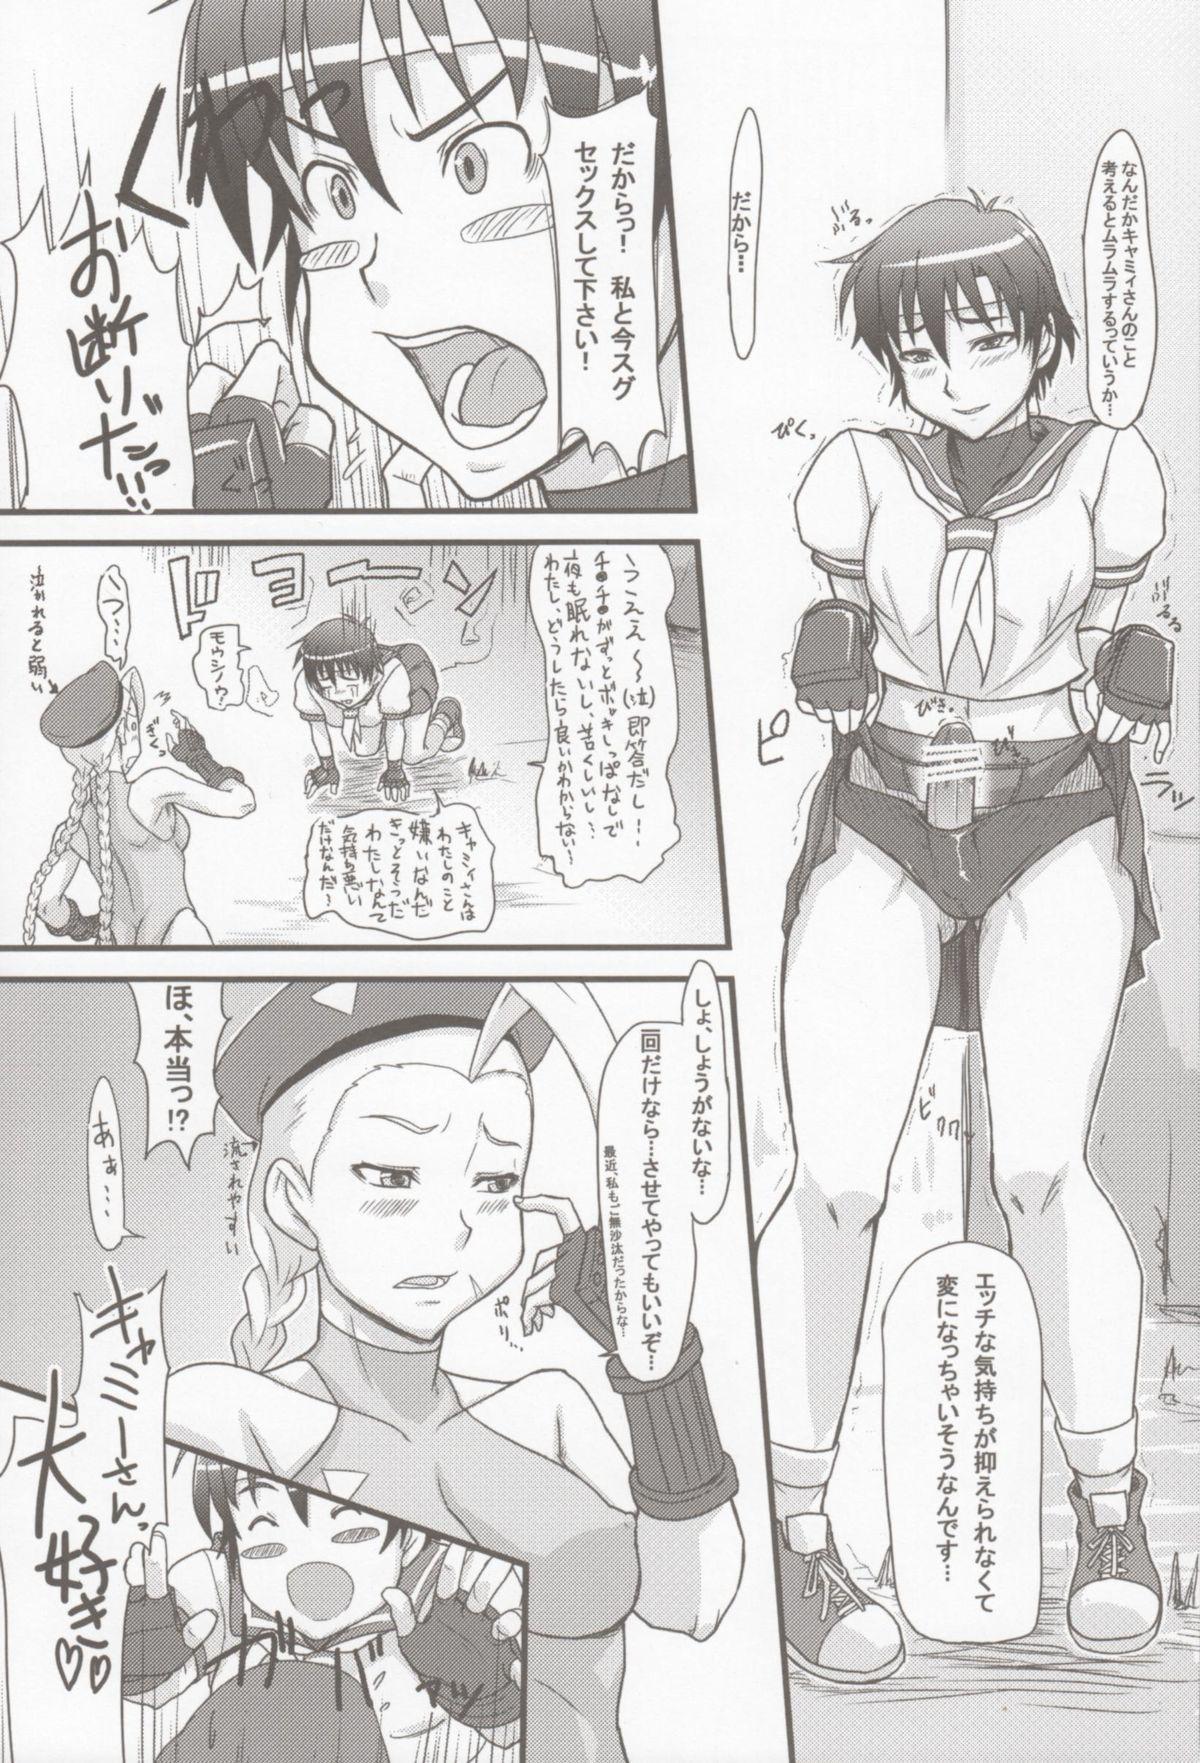 Rico Cammy Saku! Fighter Material Vol. 2 - Street fighter Wank - Page 8